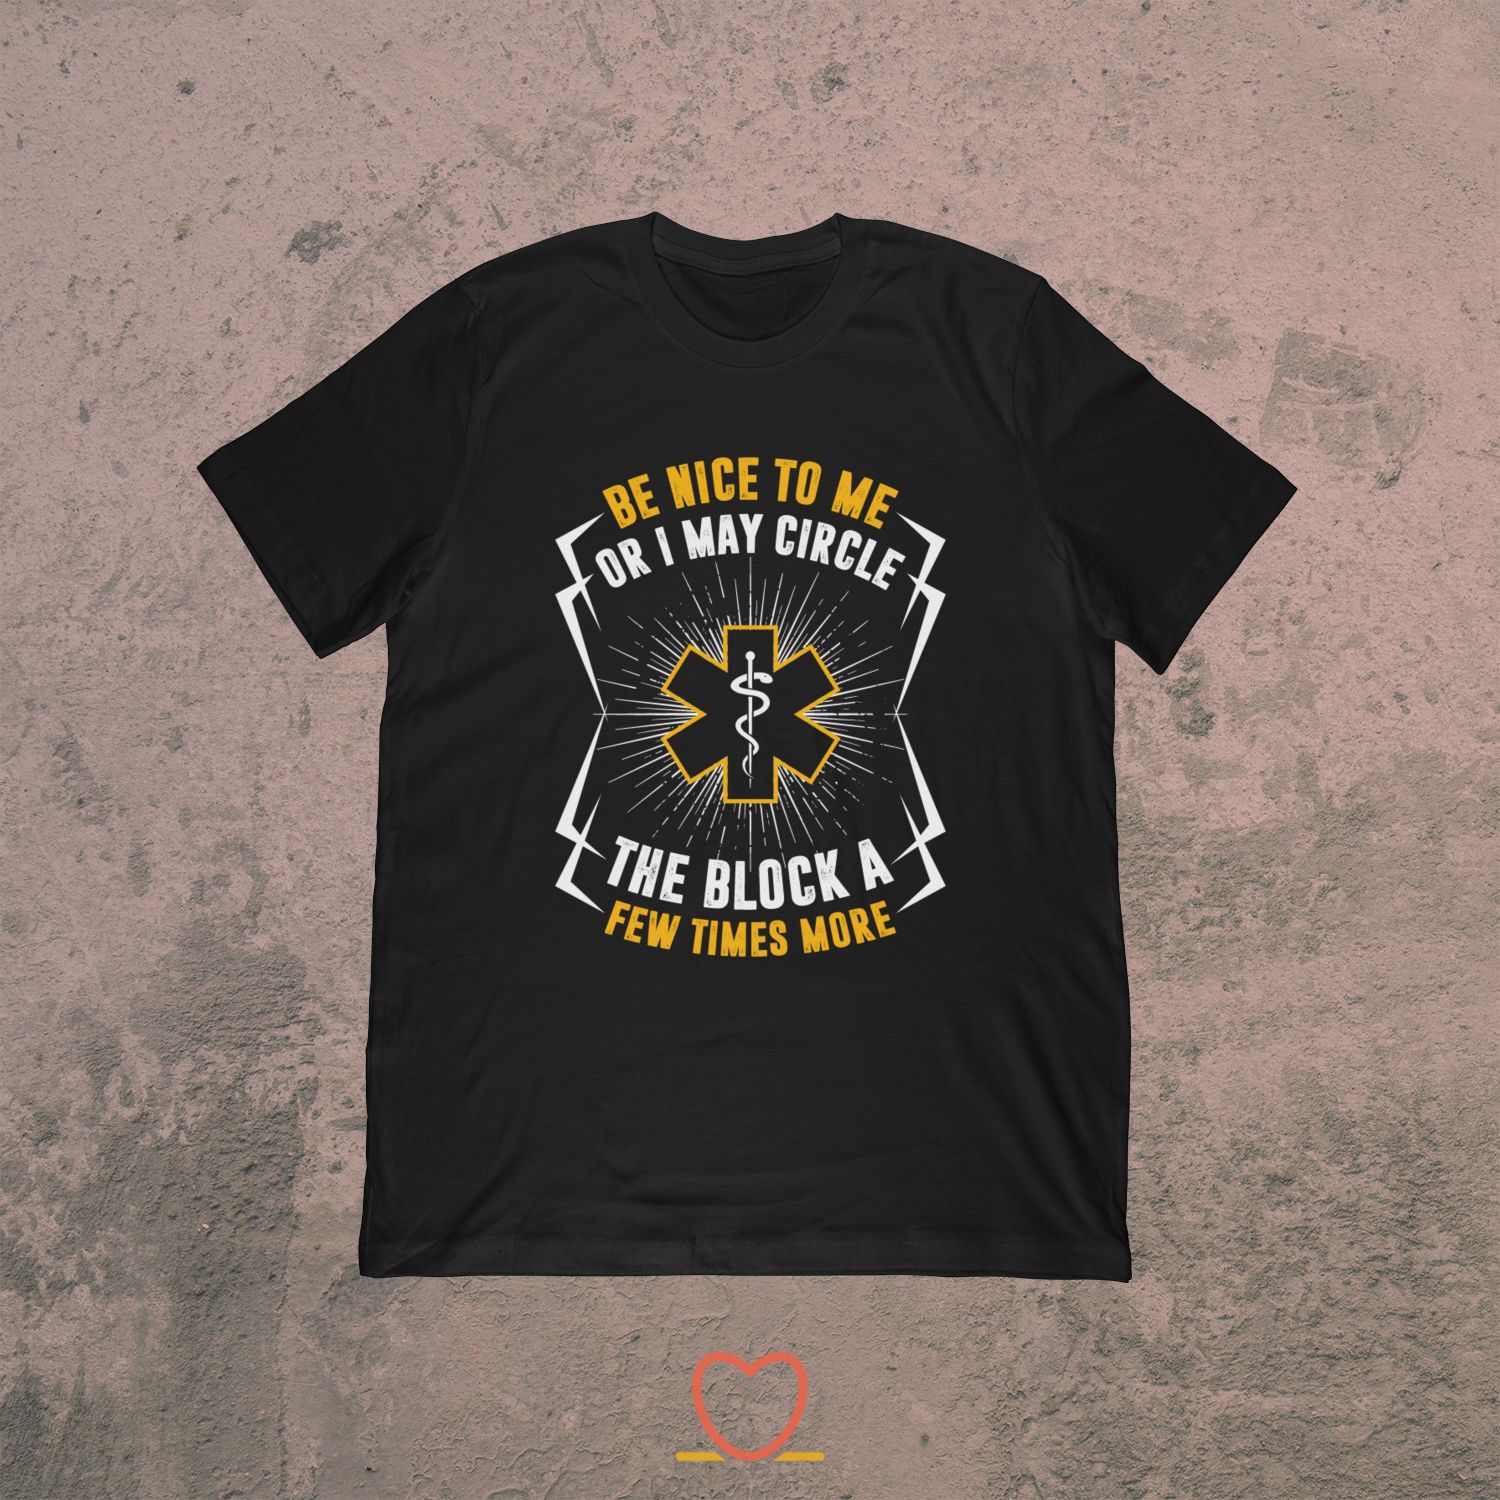 Be Nice To Me Or I May Circle The Block – Funny Medical Tee